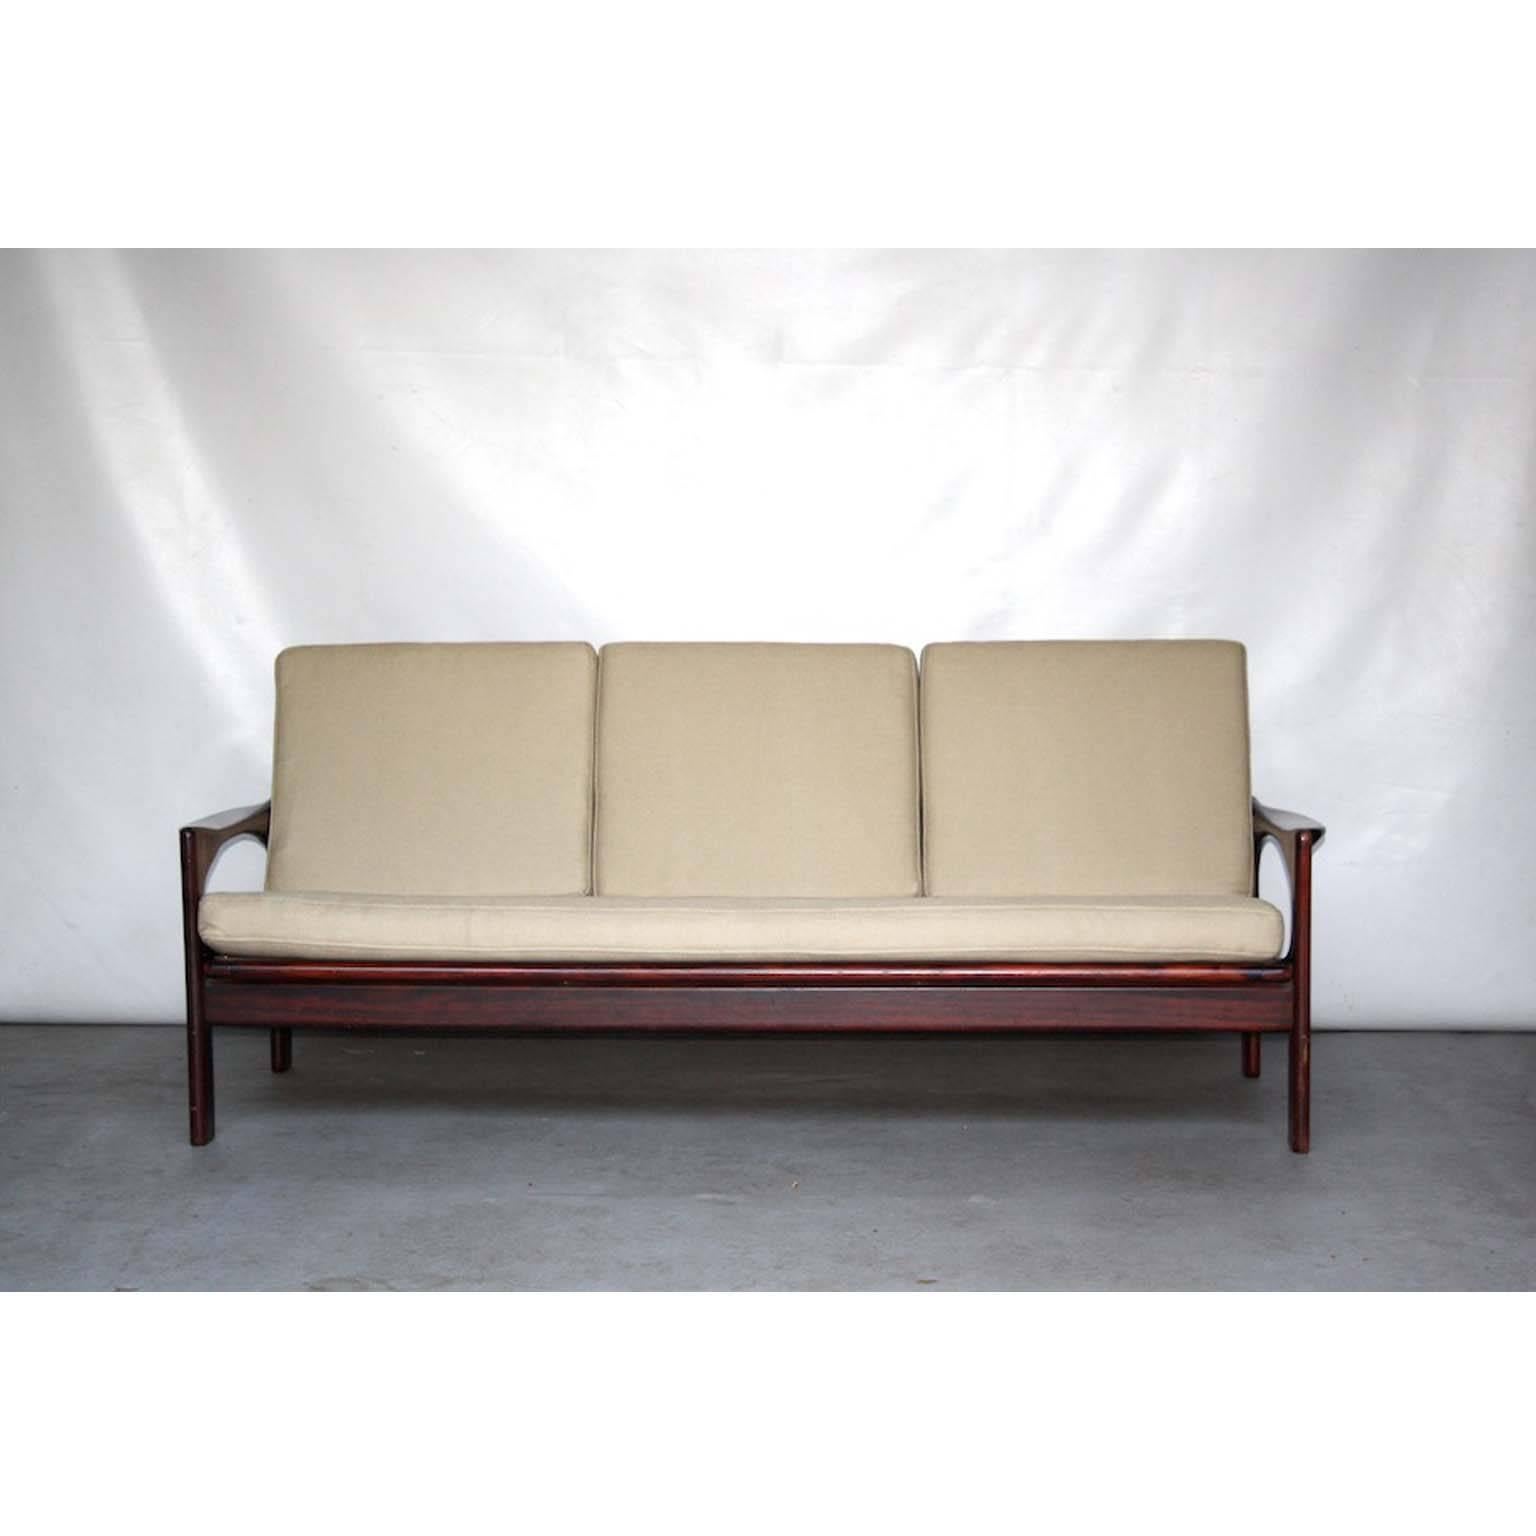 Sofa by De Ster, Dutch Design 1950s

Wooden sofa designed and produced in the Netherlands. This sofa is made by De Ster (the Star), later called Gelderland. De Ster was a Dutch furniture manufacturer from the Mid-Century. They were known by their